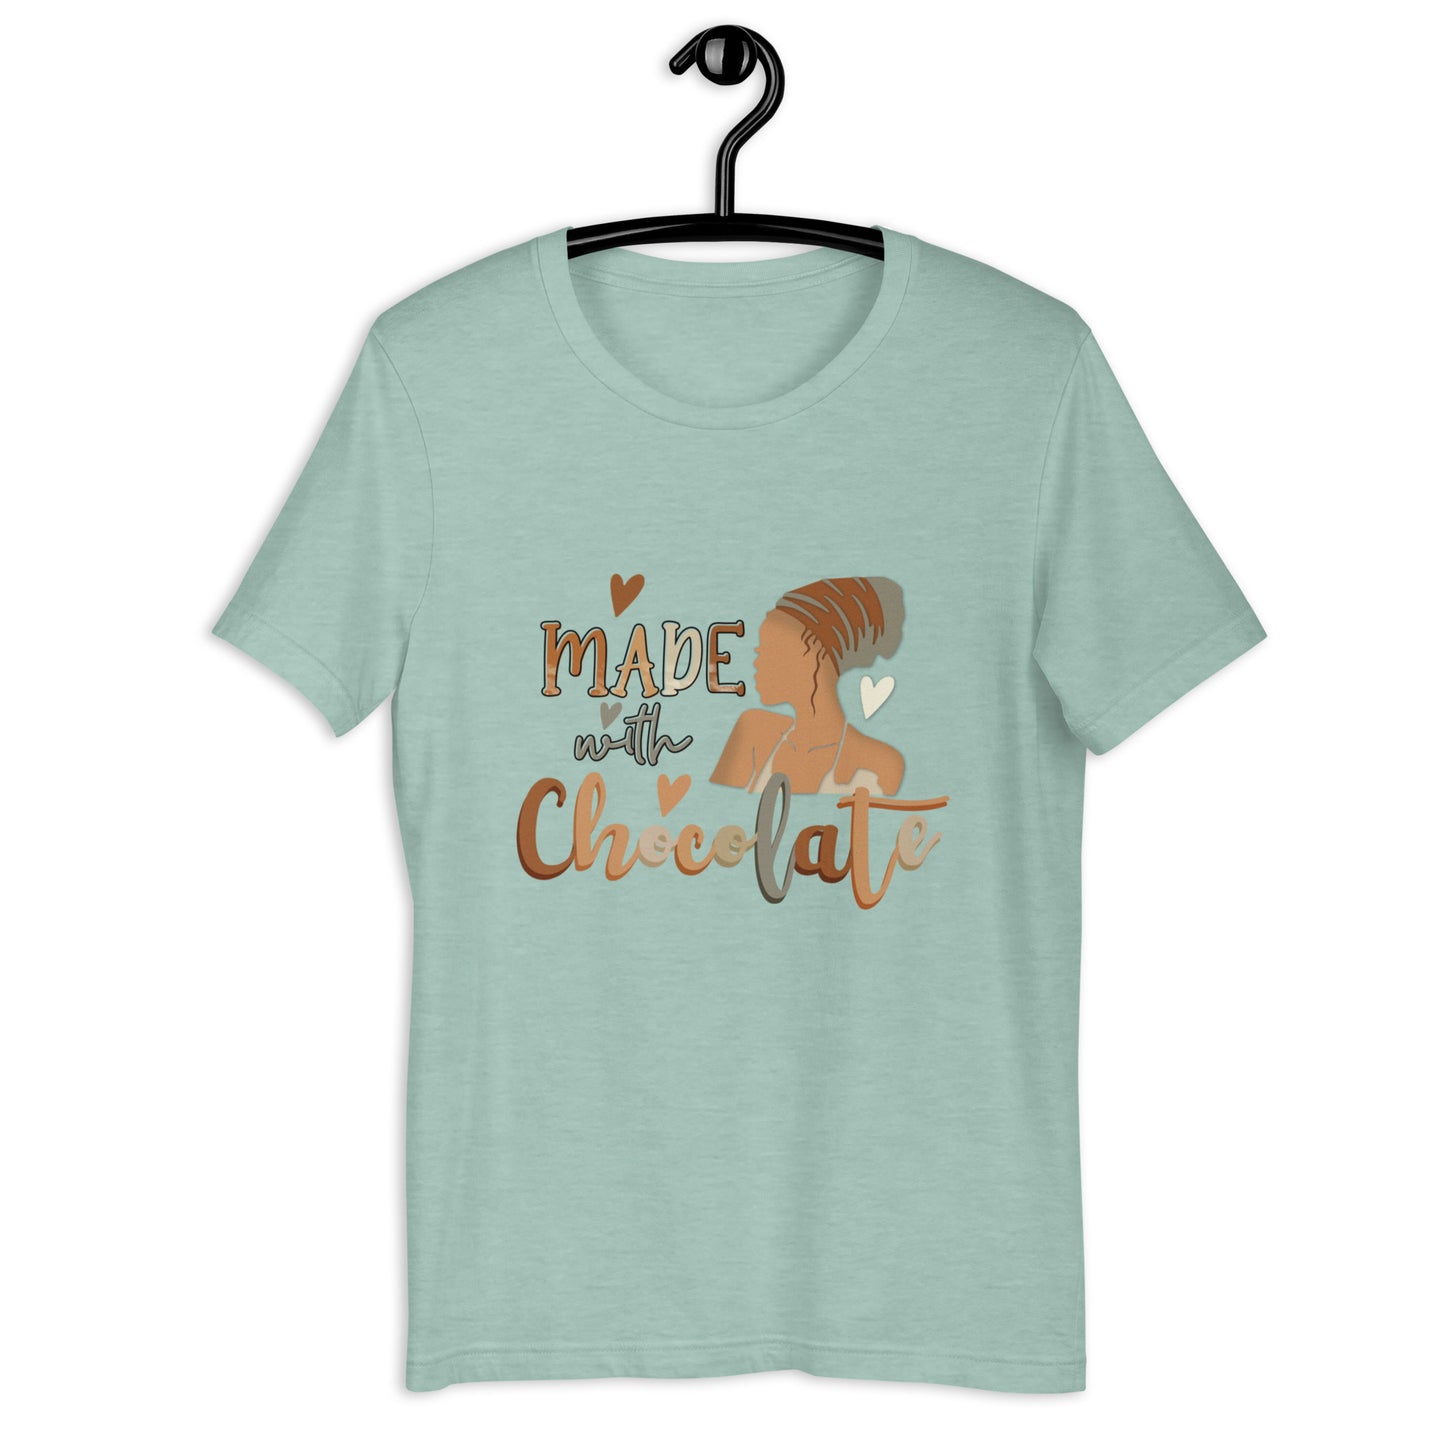 "Made With Chocolate" Unisex T-shirt